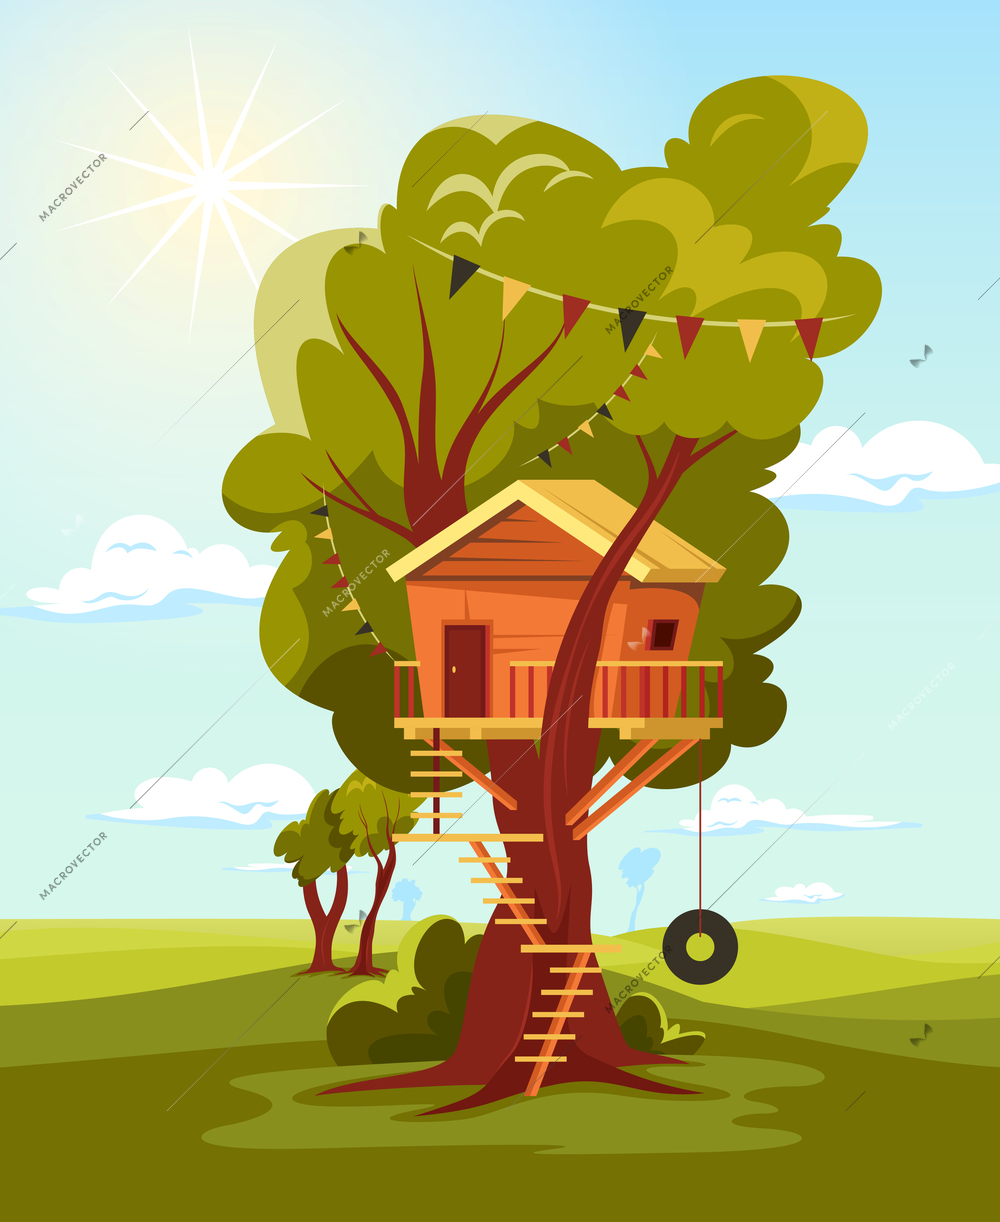 Children tree wood house composition with vertical landscape and huge tree with attached house and ladder vector illustration